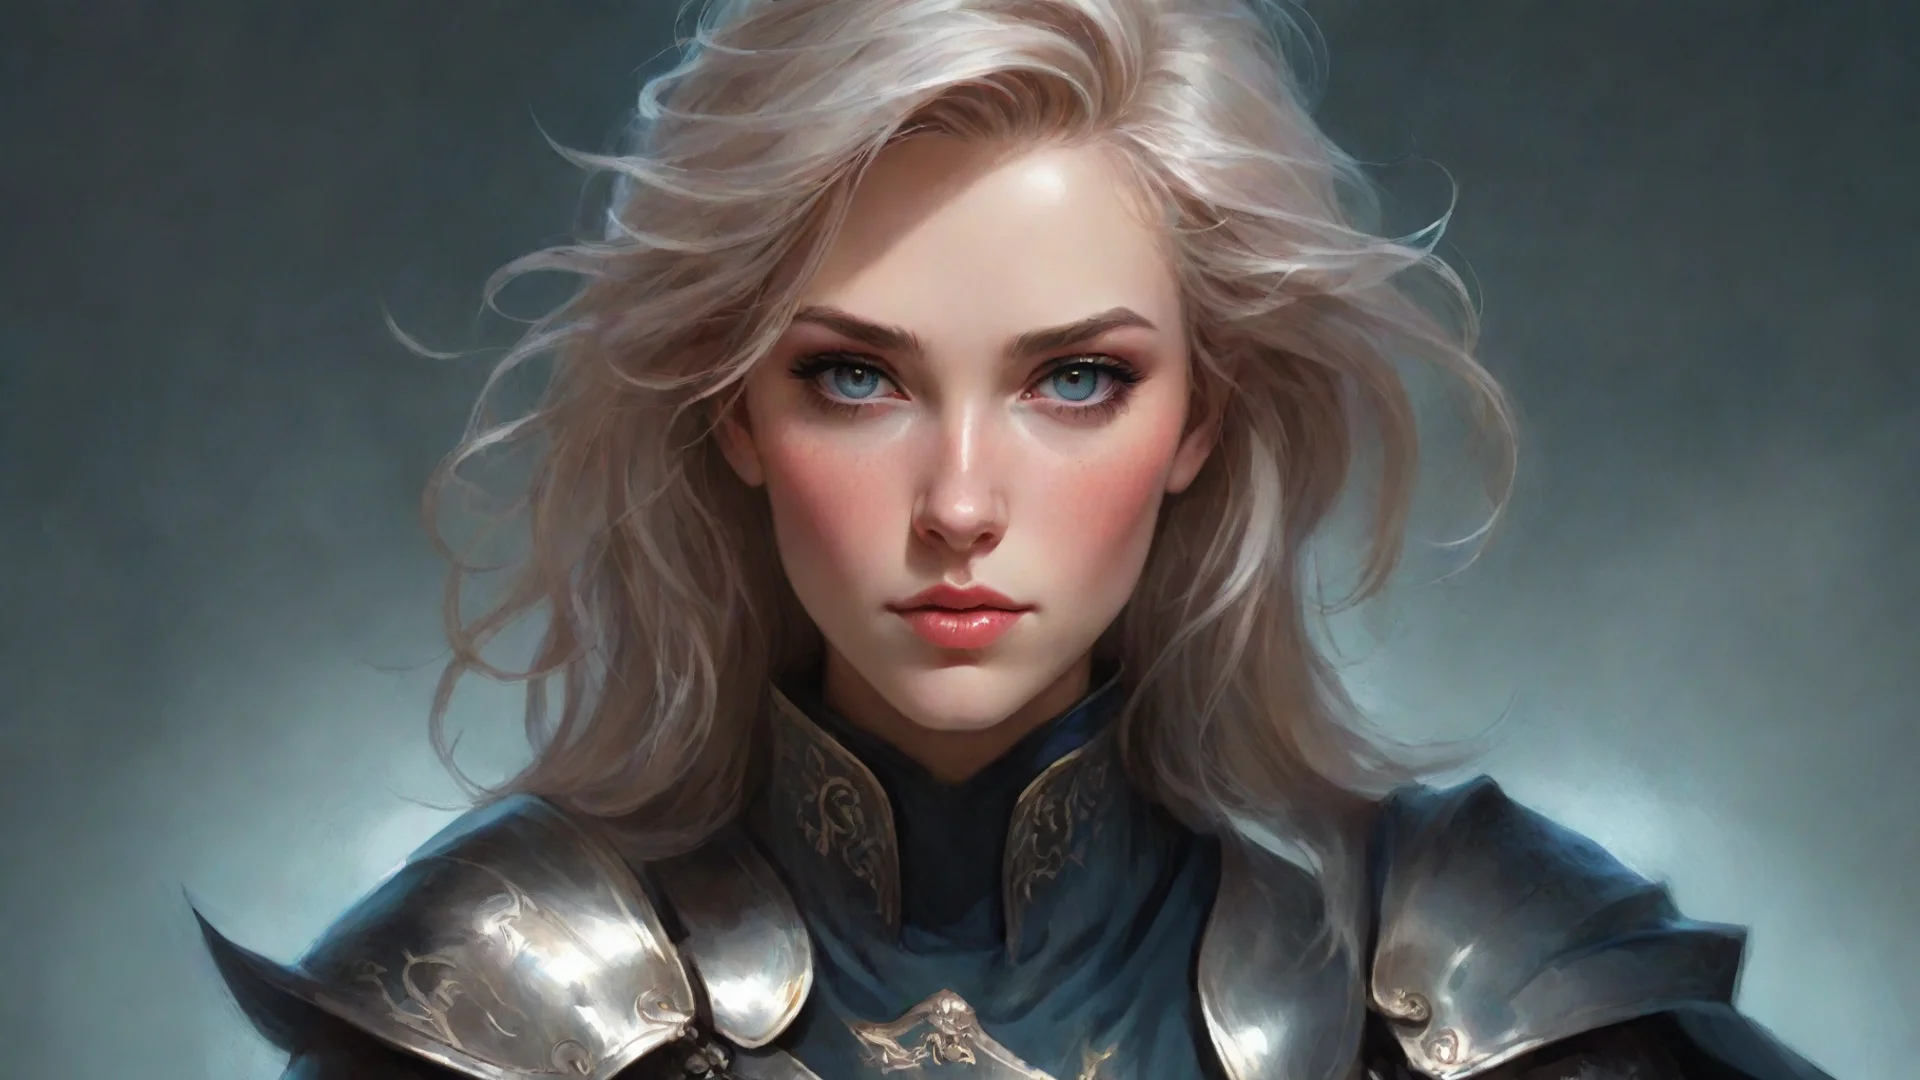 aiamazing stunning portrait illustration beautiful androgynous wizard knight by ross tran by charlie bowater illustration highly d awesome portrait 2 wide